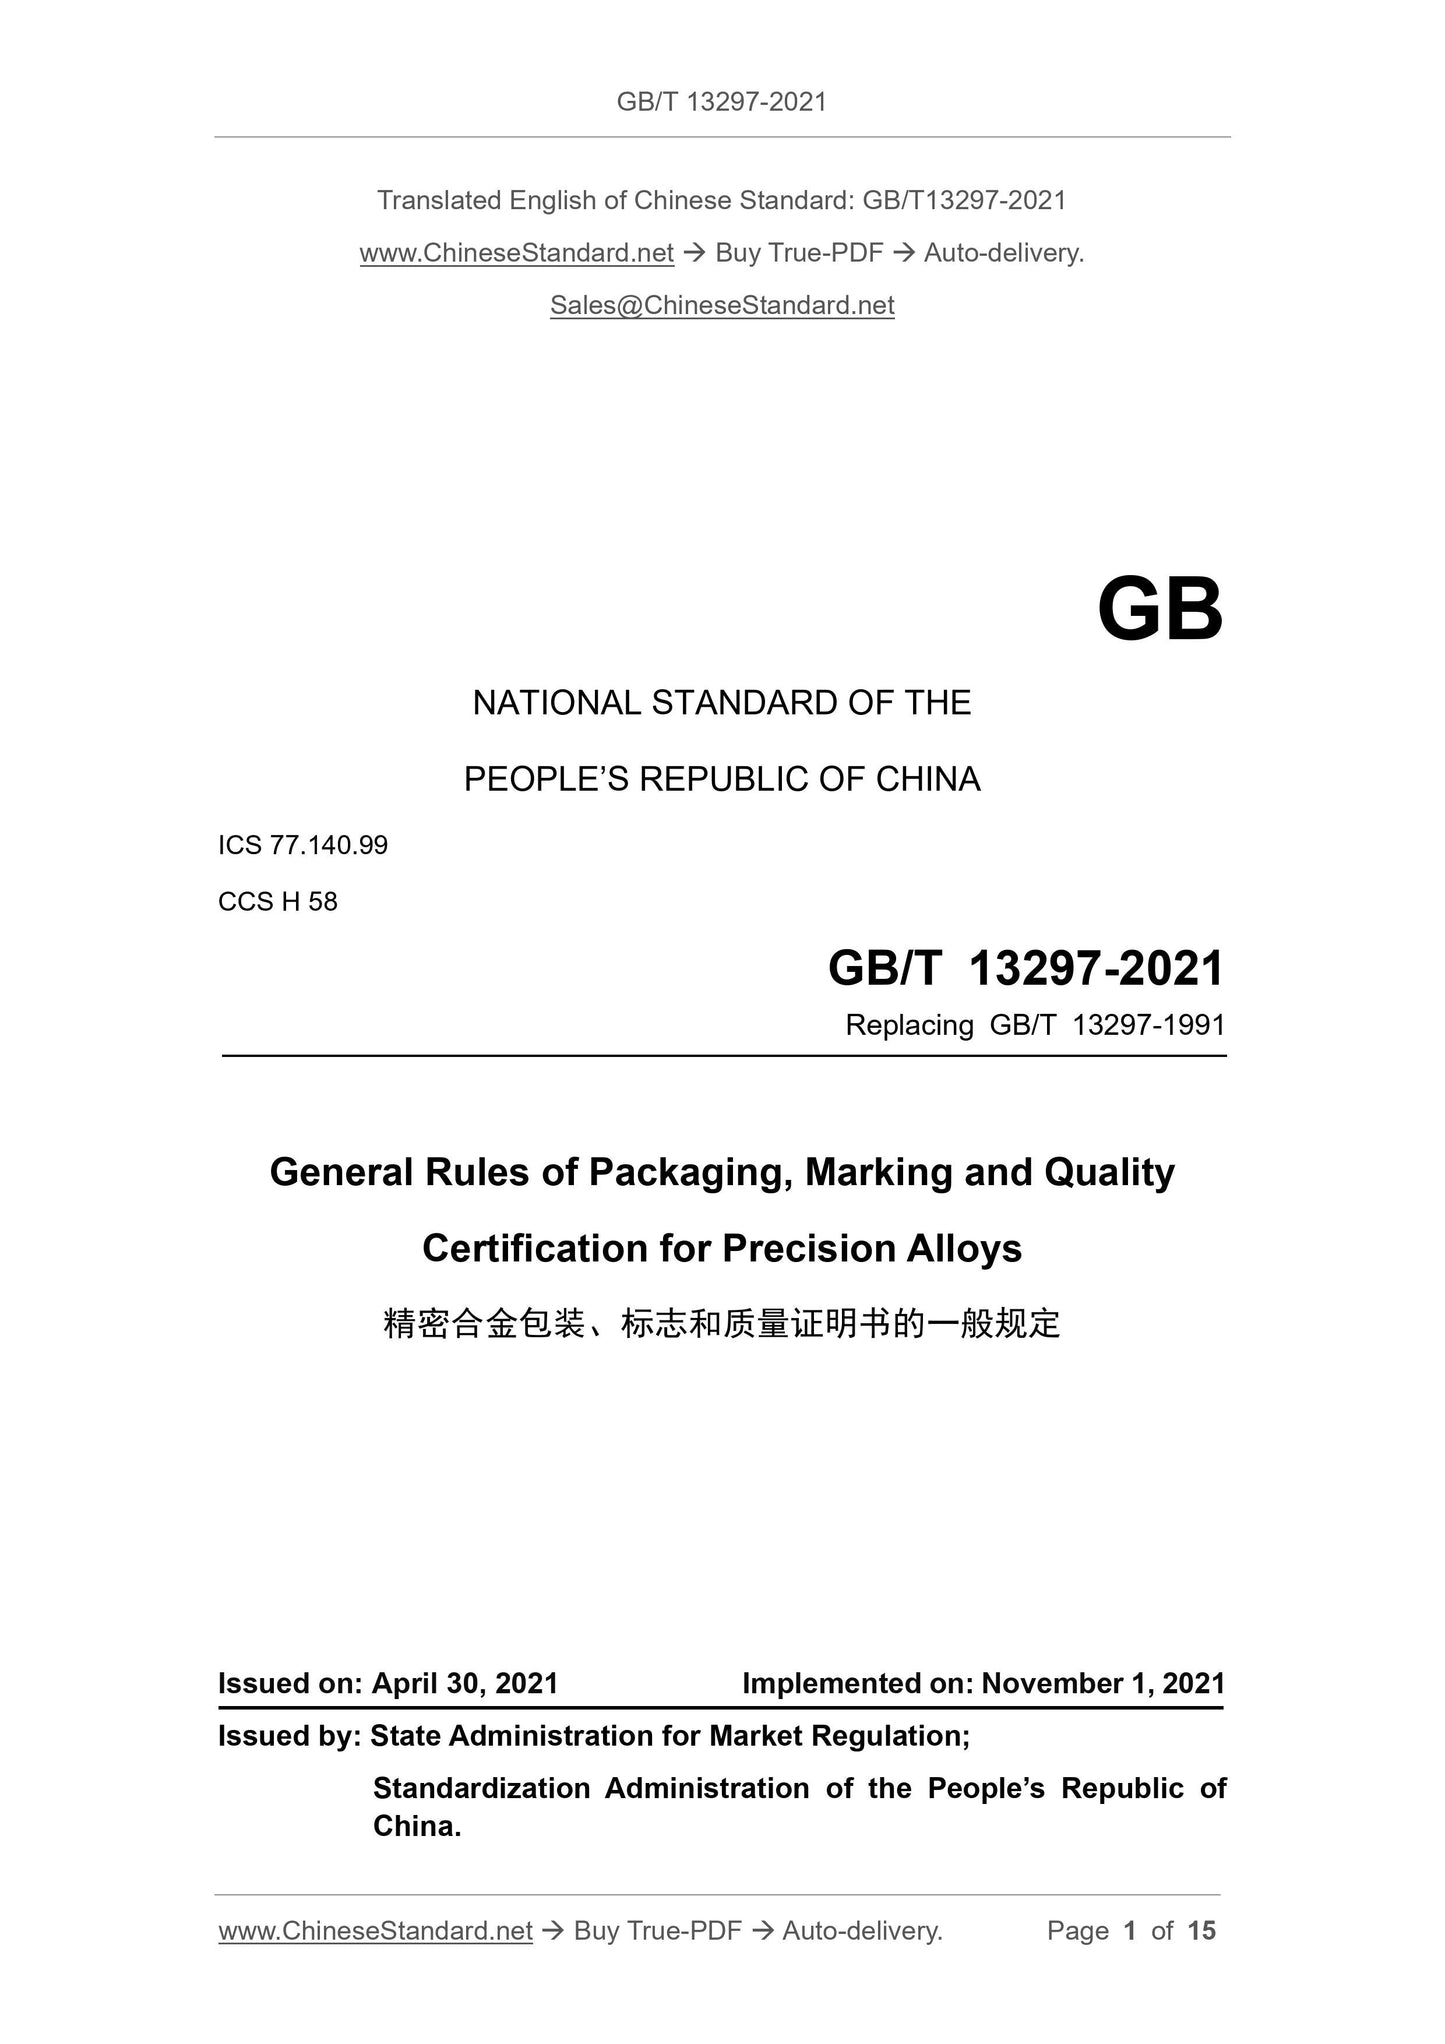 GB/T 13297-2021 Page 1